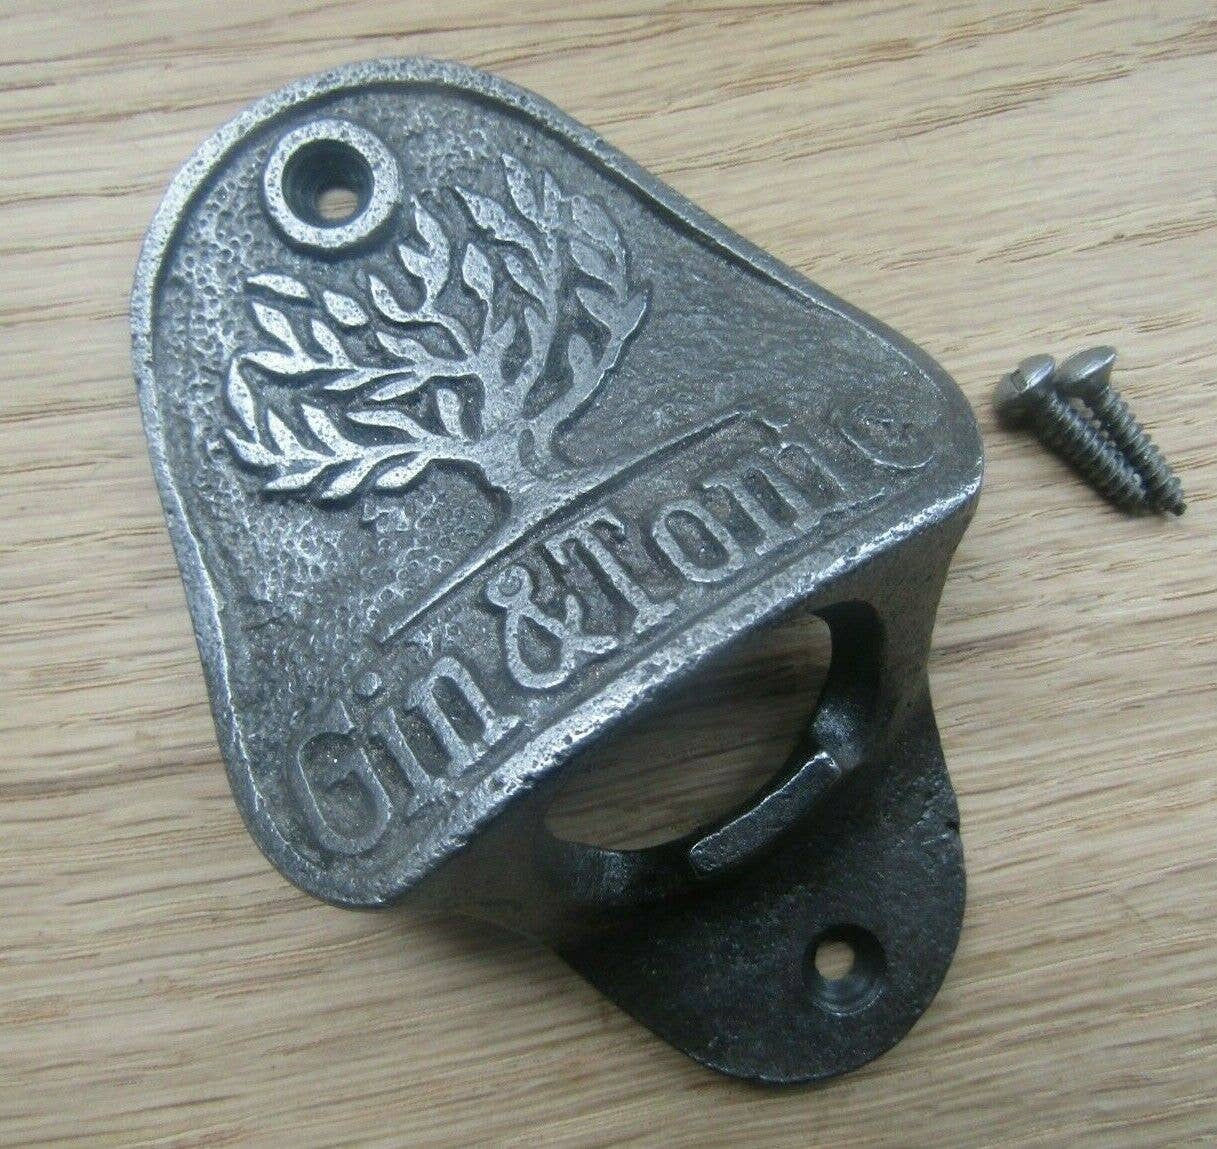 1 x BOTTLE OPENER GUINNESS CAST IRON WALL MOUNTED FIXINGS ** FREE P&P** 